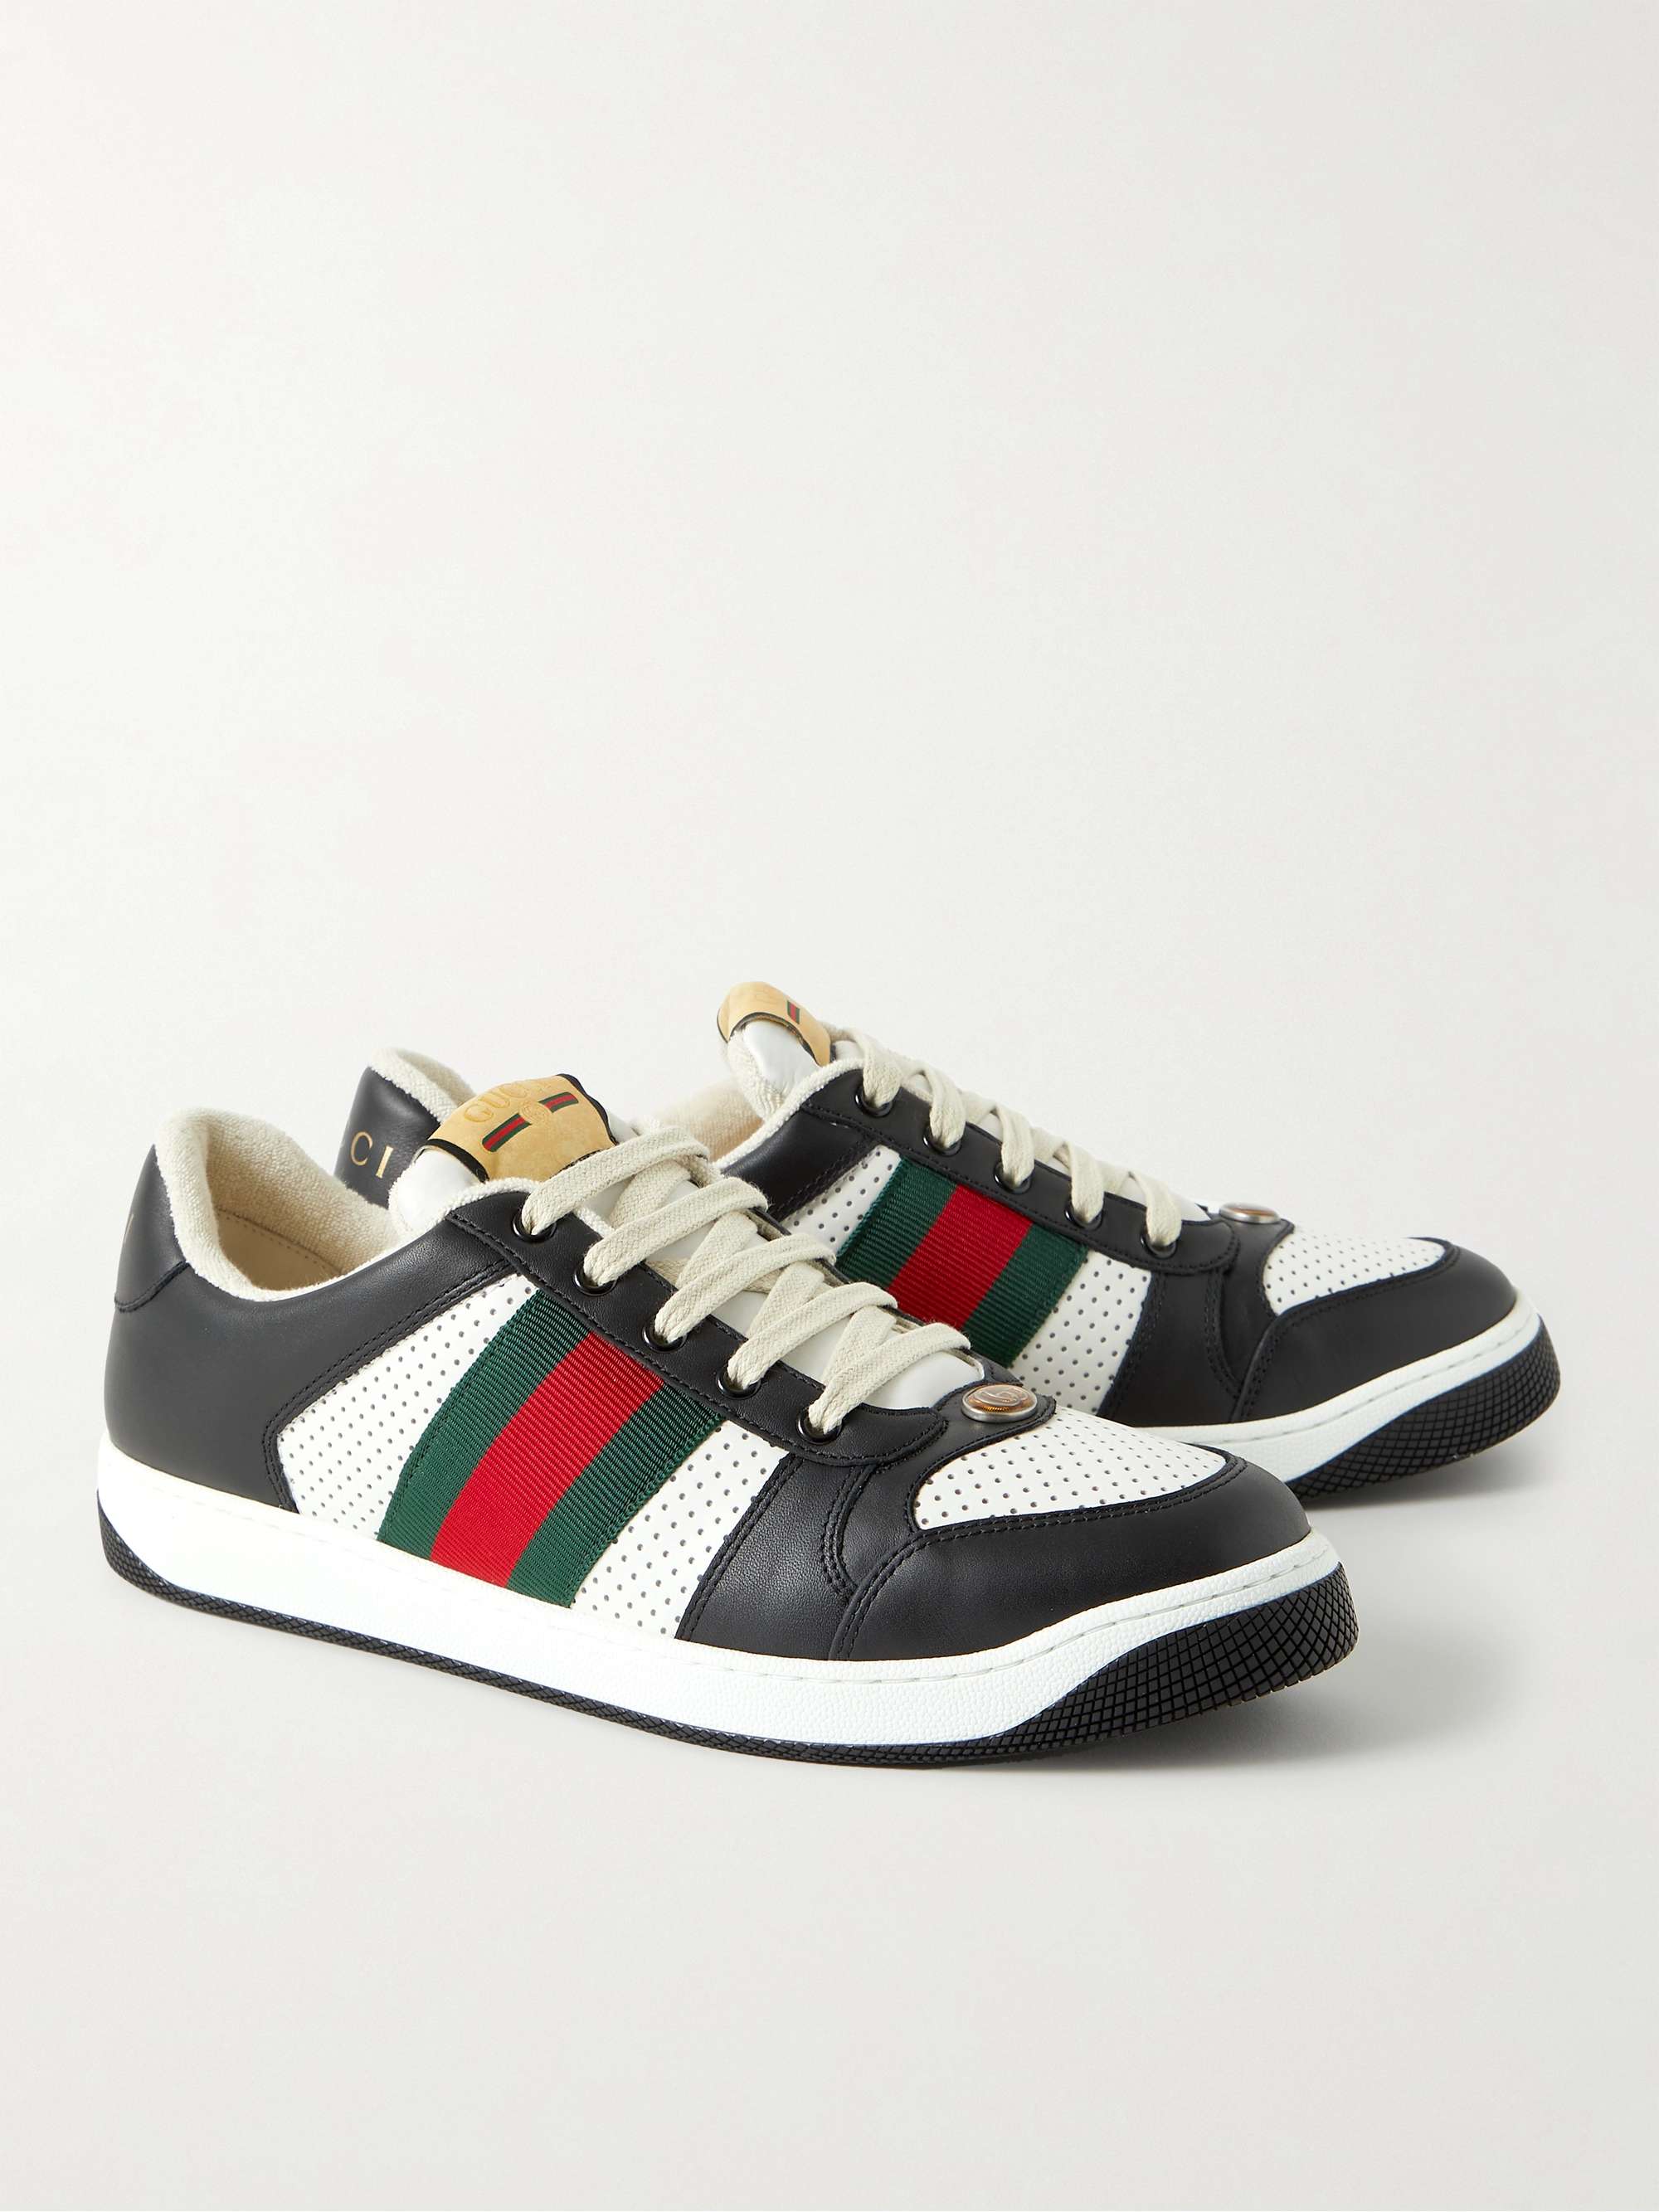 GUCCI Screener Webbing-Trimmed Perforated Leather Sneakers